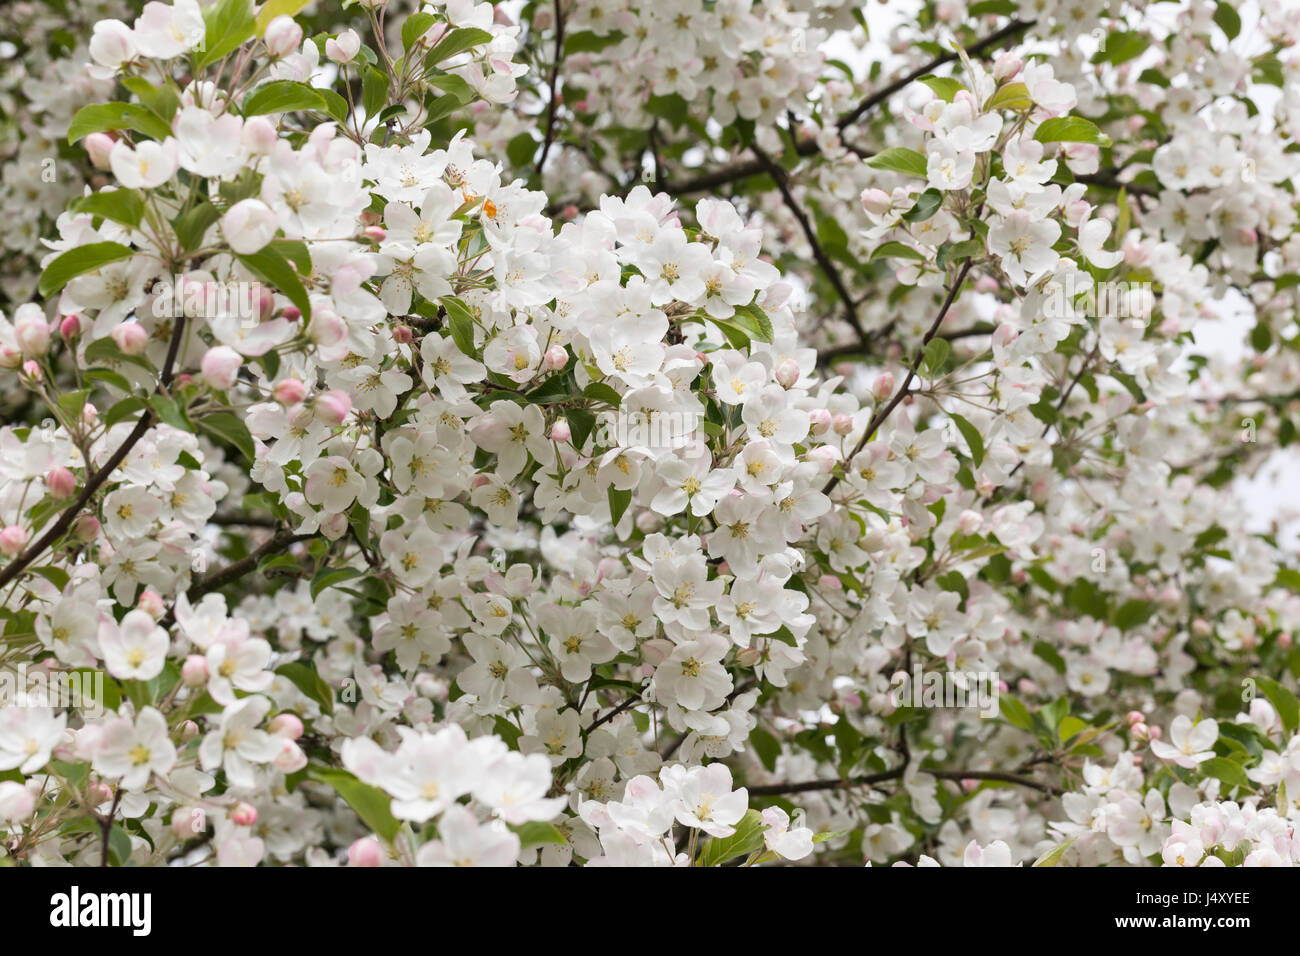 Apple blossom of Malus hupehensis, Hupeh crabapple flowering in an English garden during Spring, England, UK Stock Photo